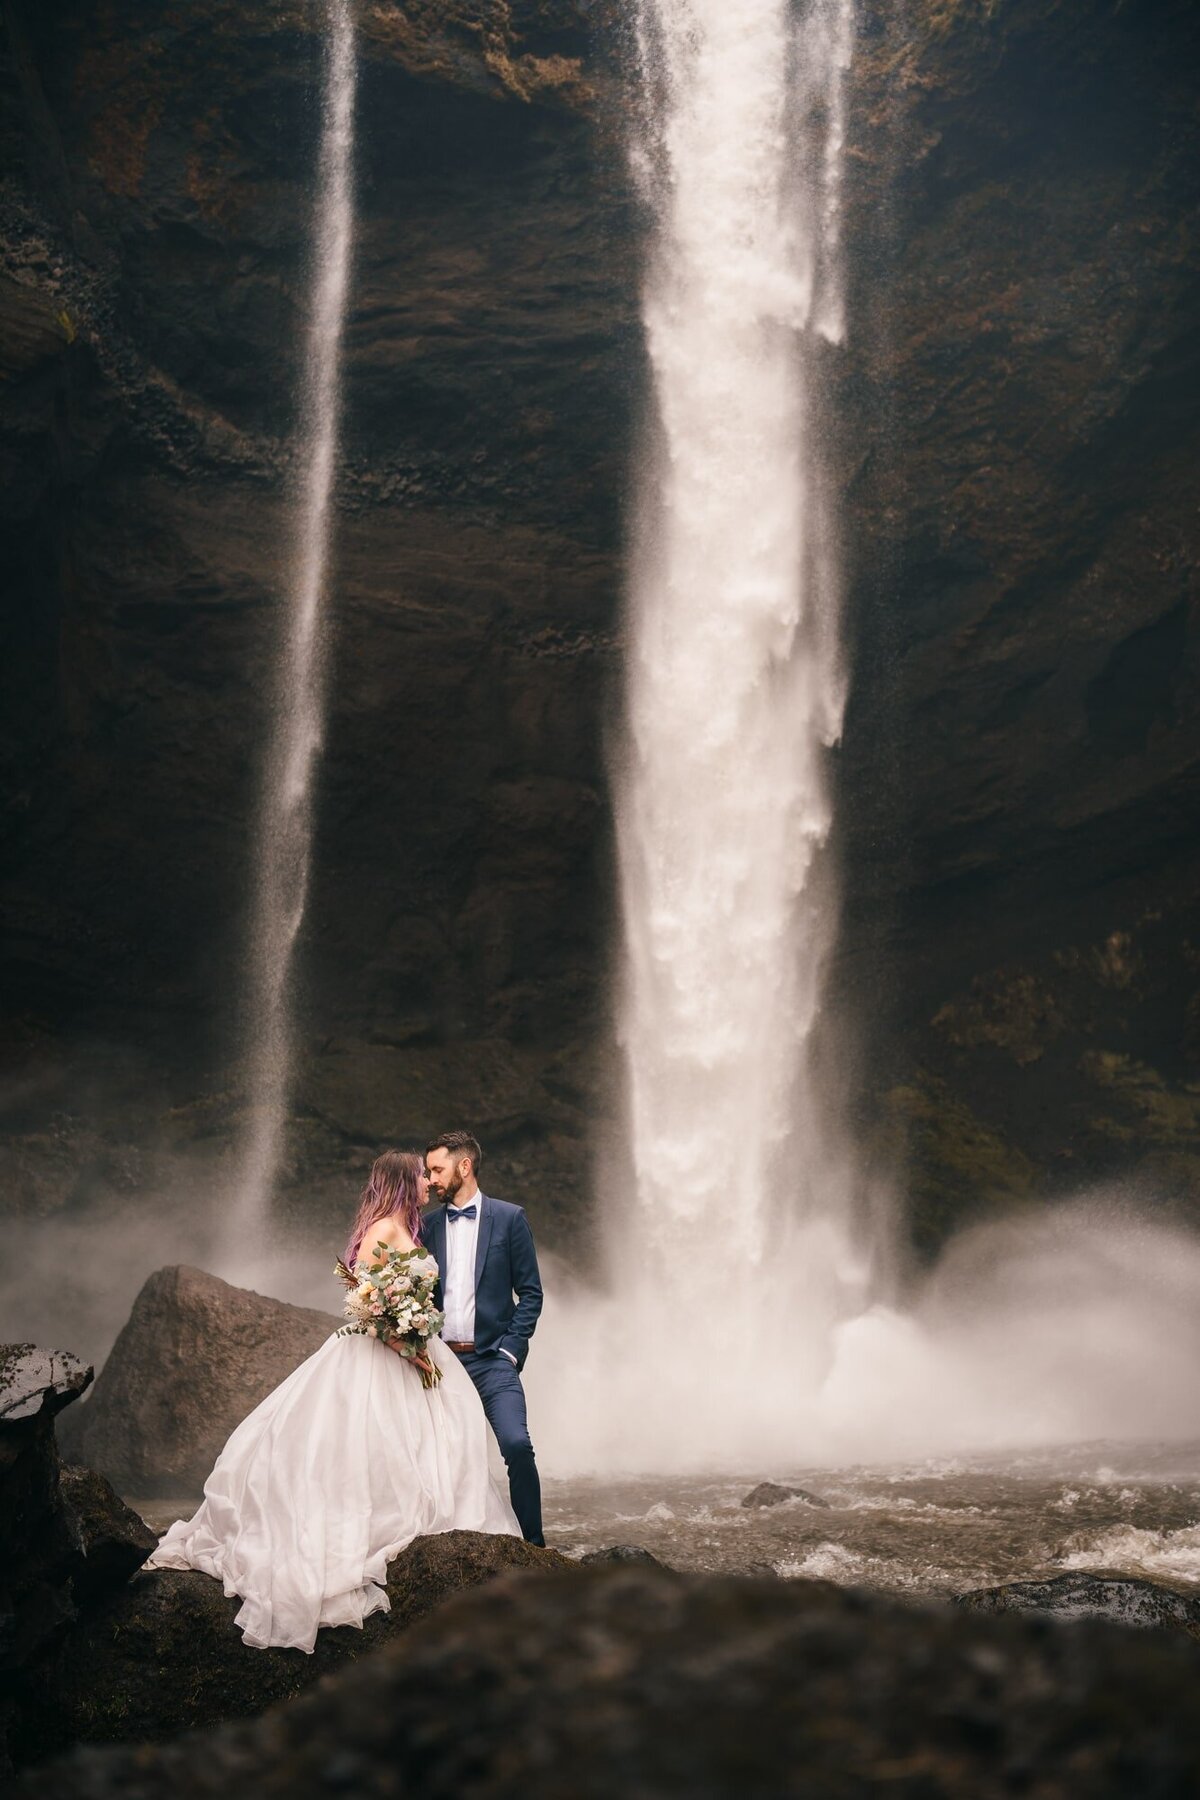 Hand in hand, this couple stands before the majestic Kvernufoss waterfalls in Iceland, creating a timeless portrait filled with love and the magic of nature.